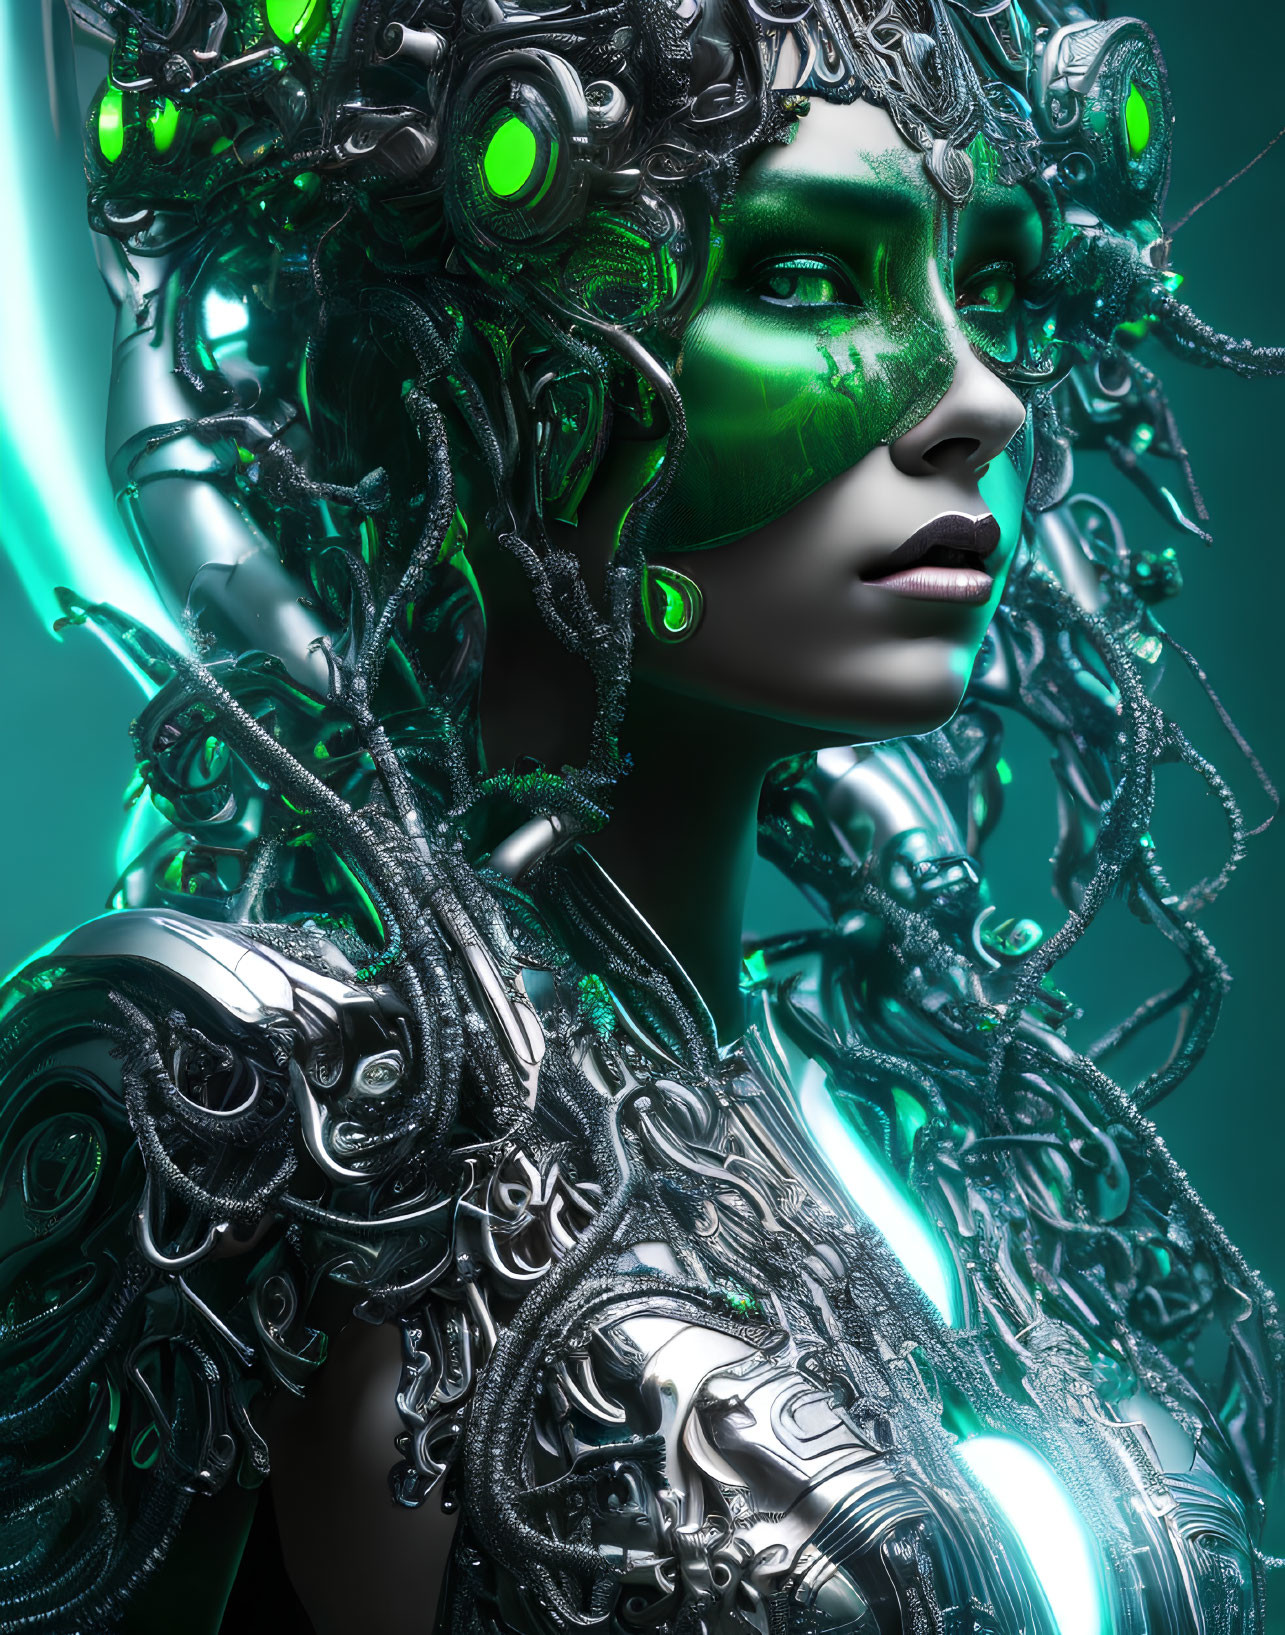 Female cyborg with silver mechanical parts and green eyes in futuristic setting